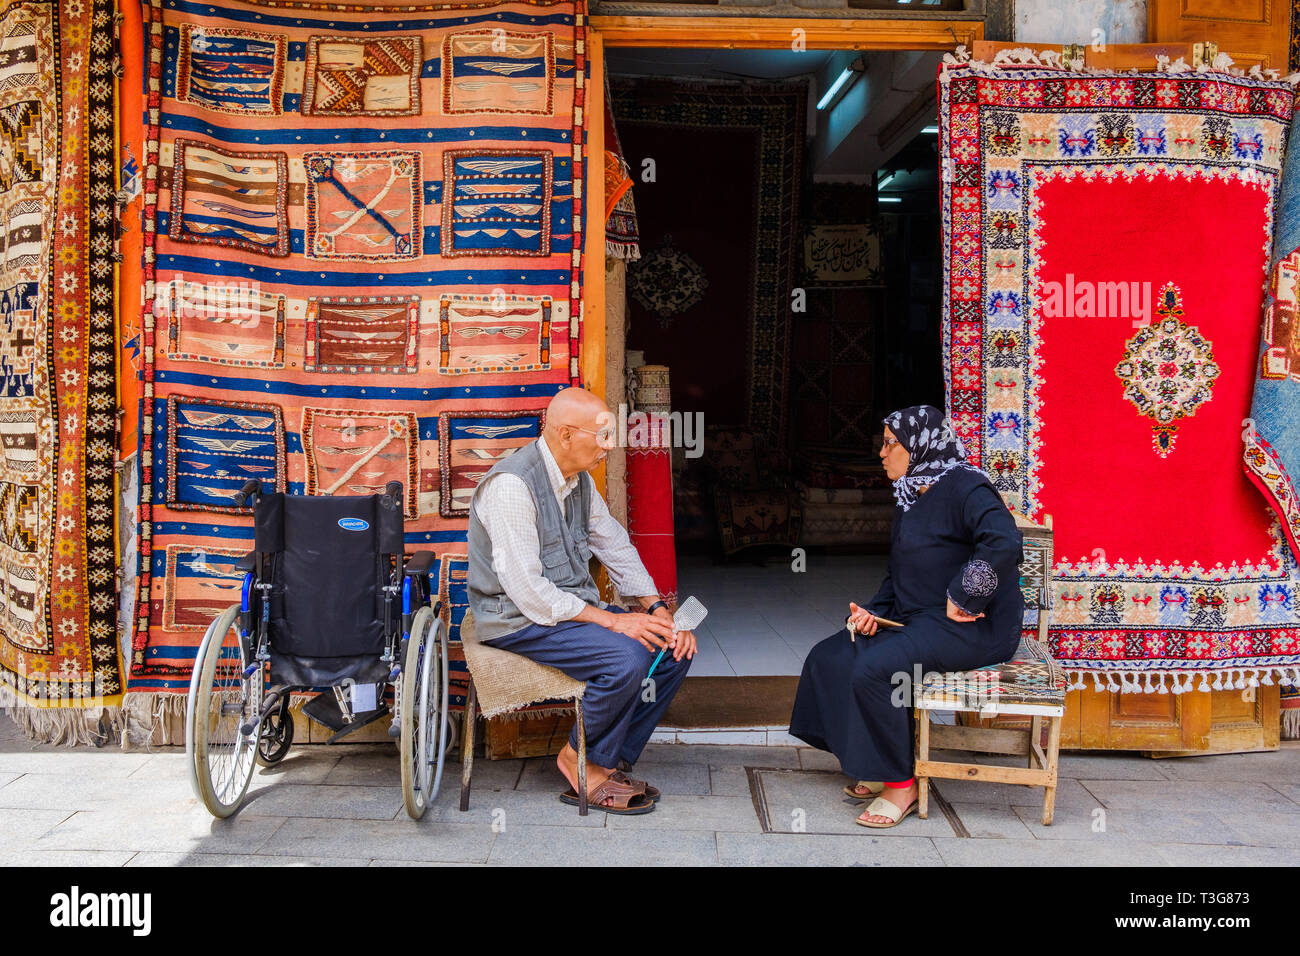 Morocco, Rabat. Lanes and shops in the medina. Man and woman sitting on chairs, talking in front of the shop of a carpet seller, in the street “rue de Stock Photo